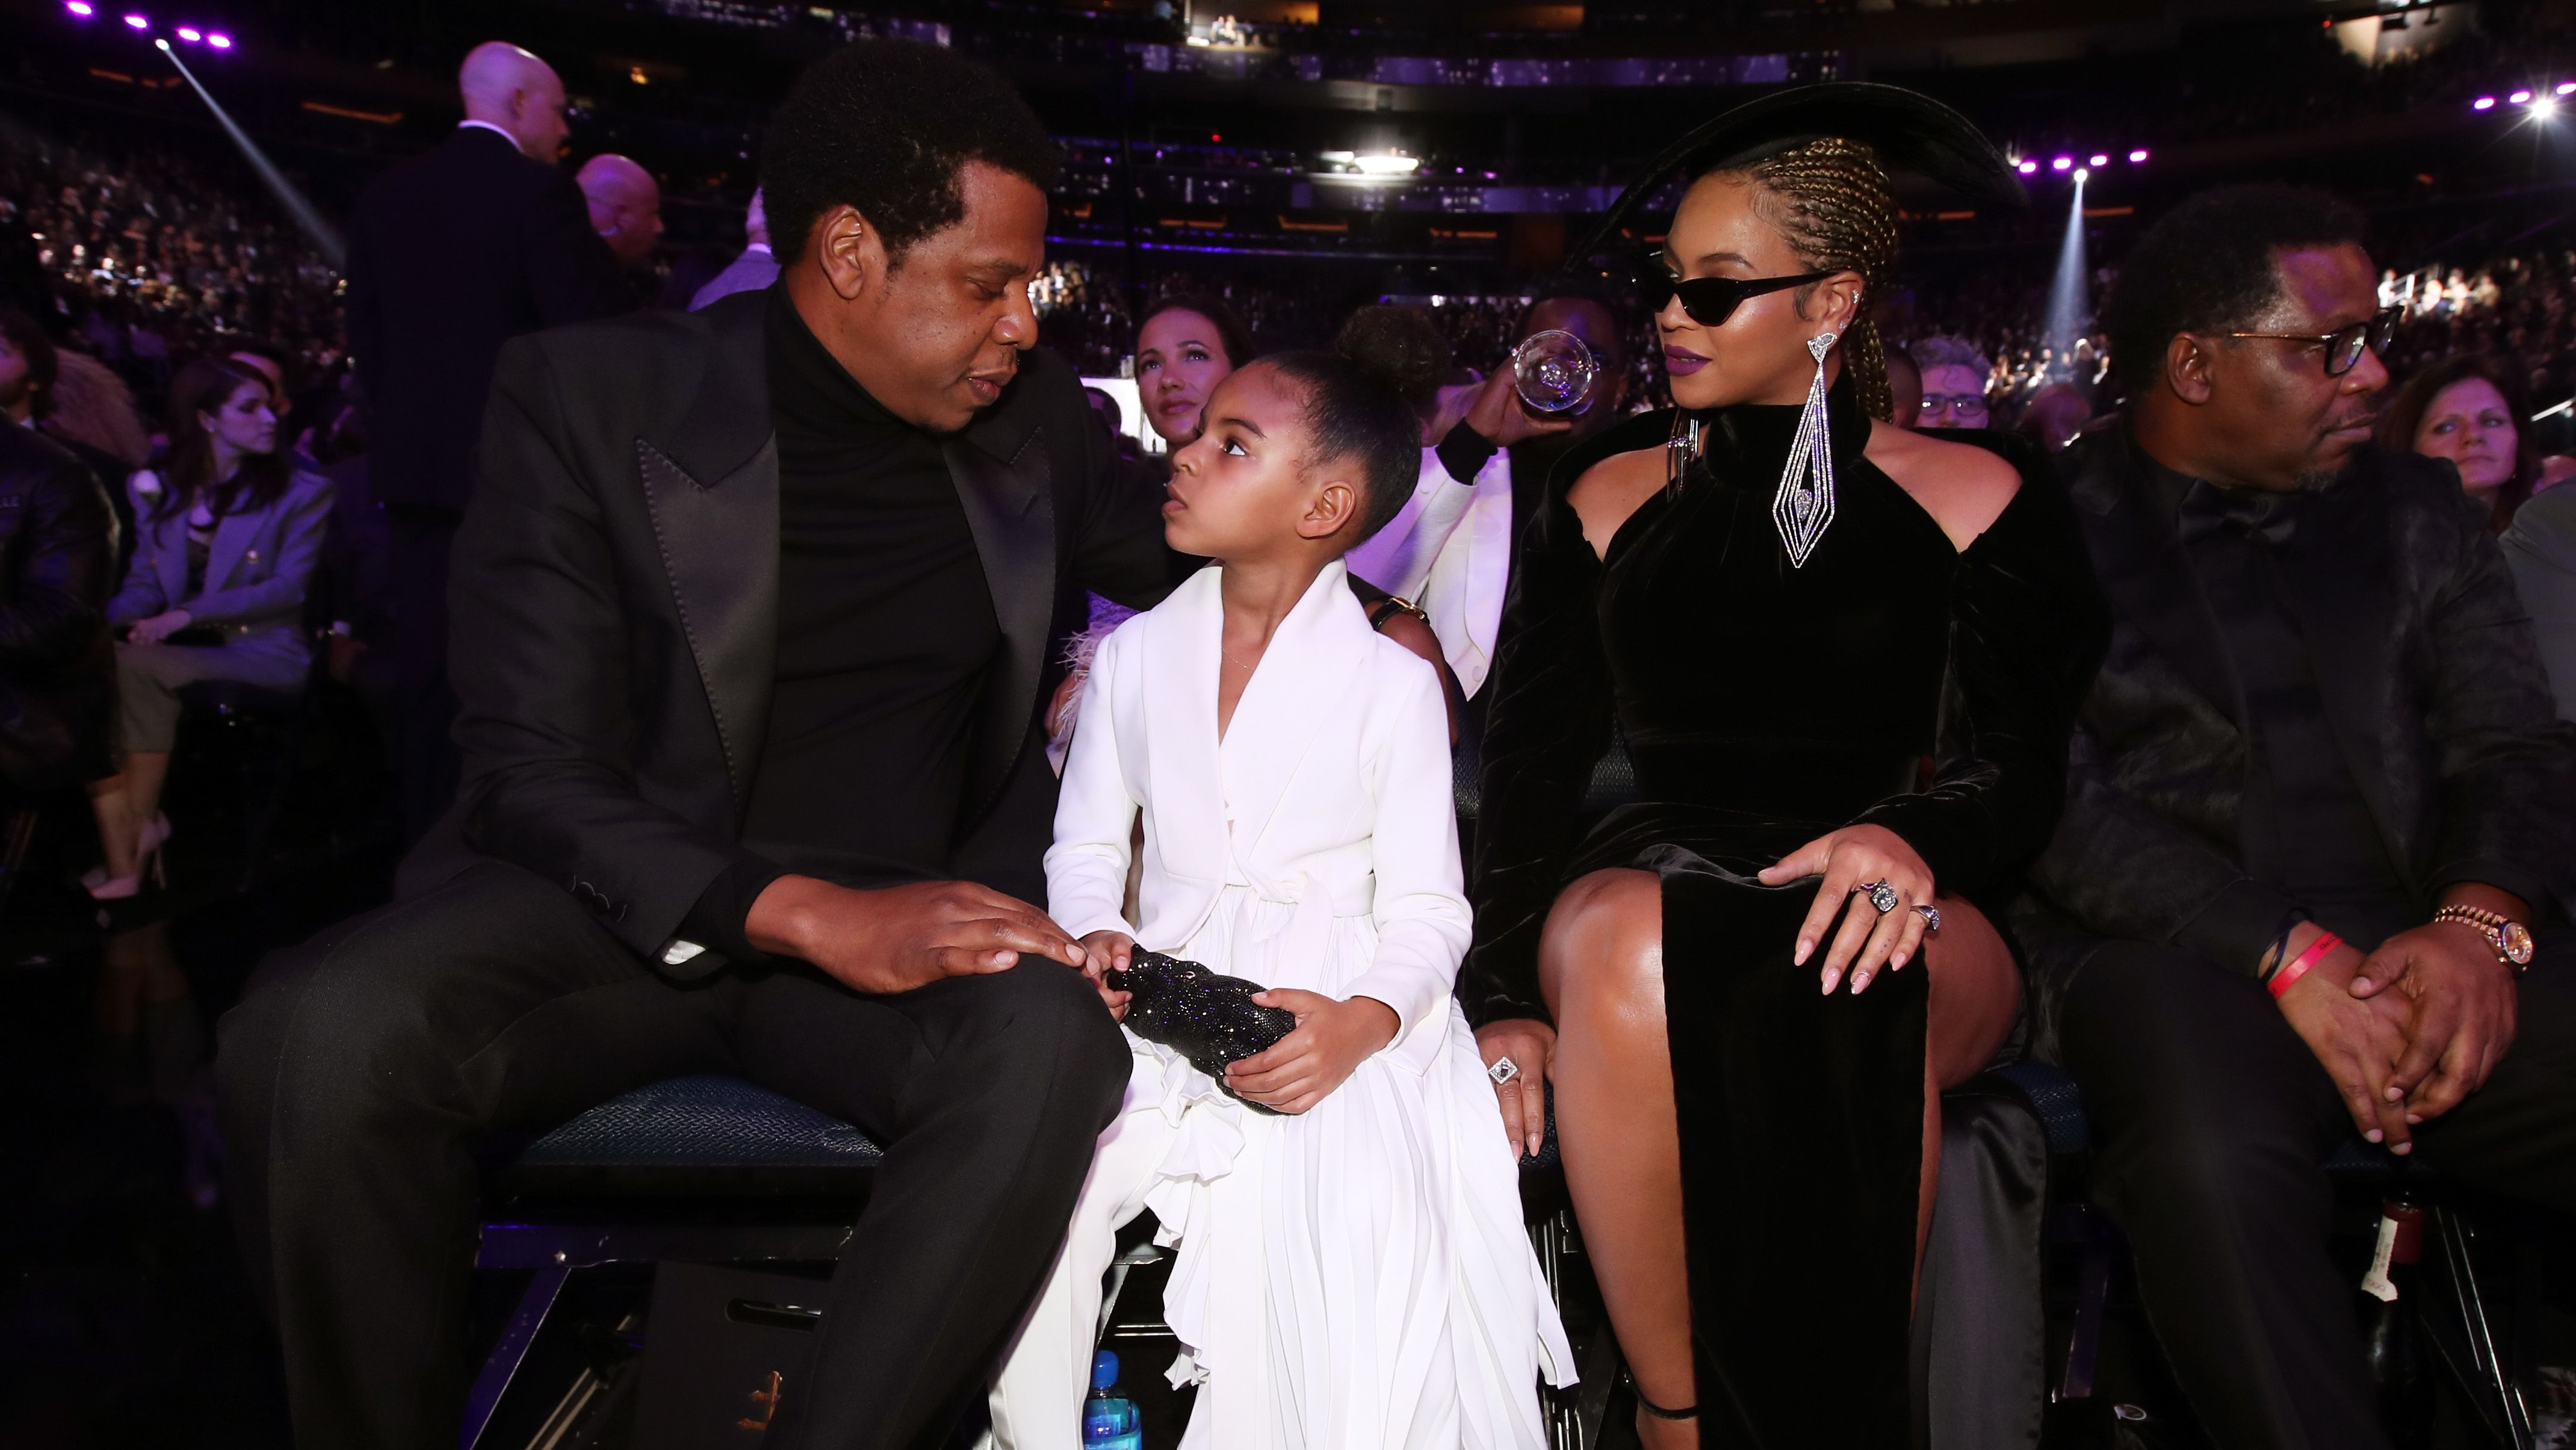 NEW YORK, NY - JANUARY 28:  Recording artist Jay-Z, Blue Ivy Carter and Beyonce attend the 60th Annual GRAMMY Awards at Madison Square Garden on January 28, 2018 in New York City.  (Photo by Christopher Polk/Getty Images for NARAS)